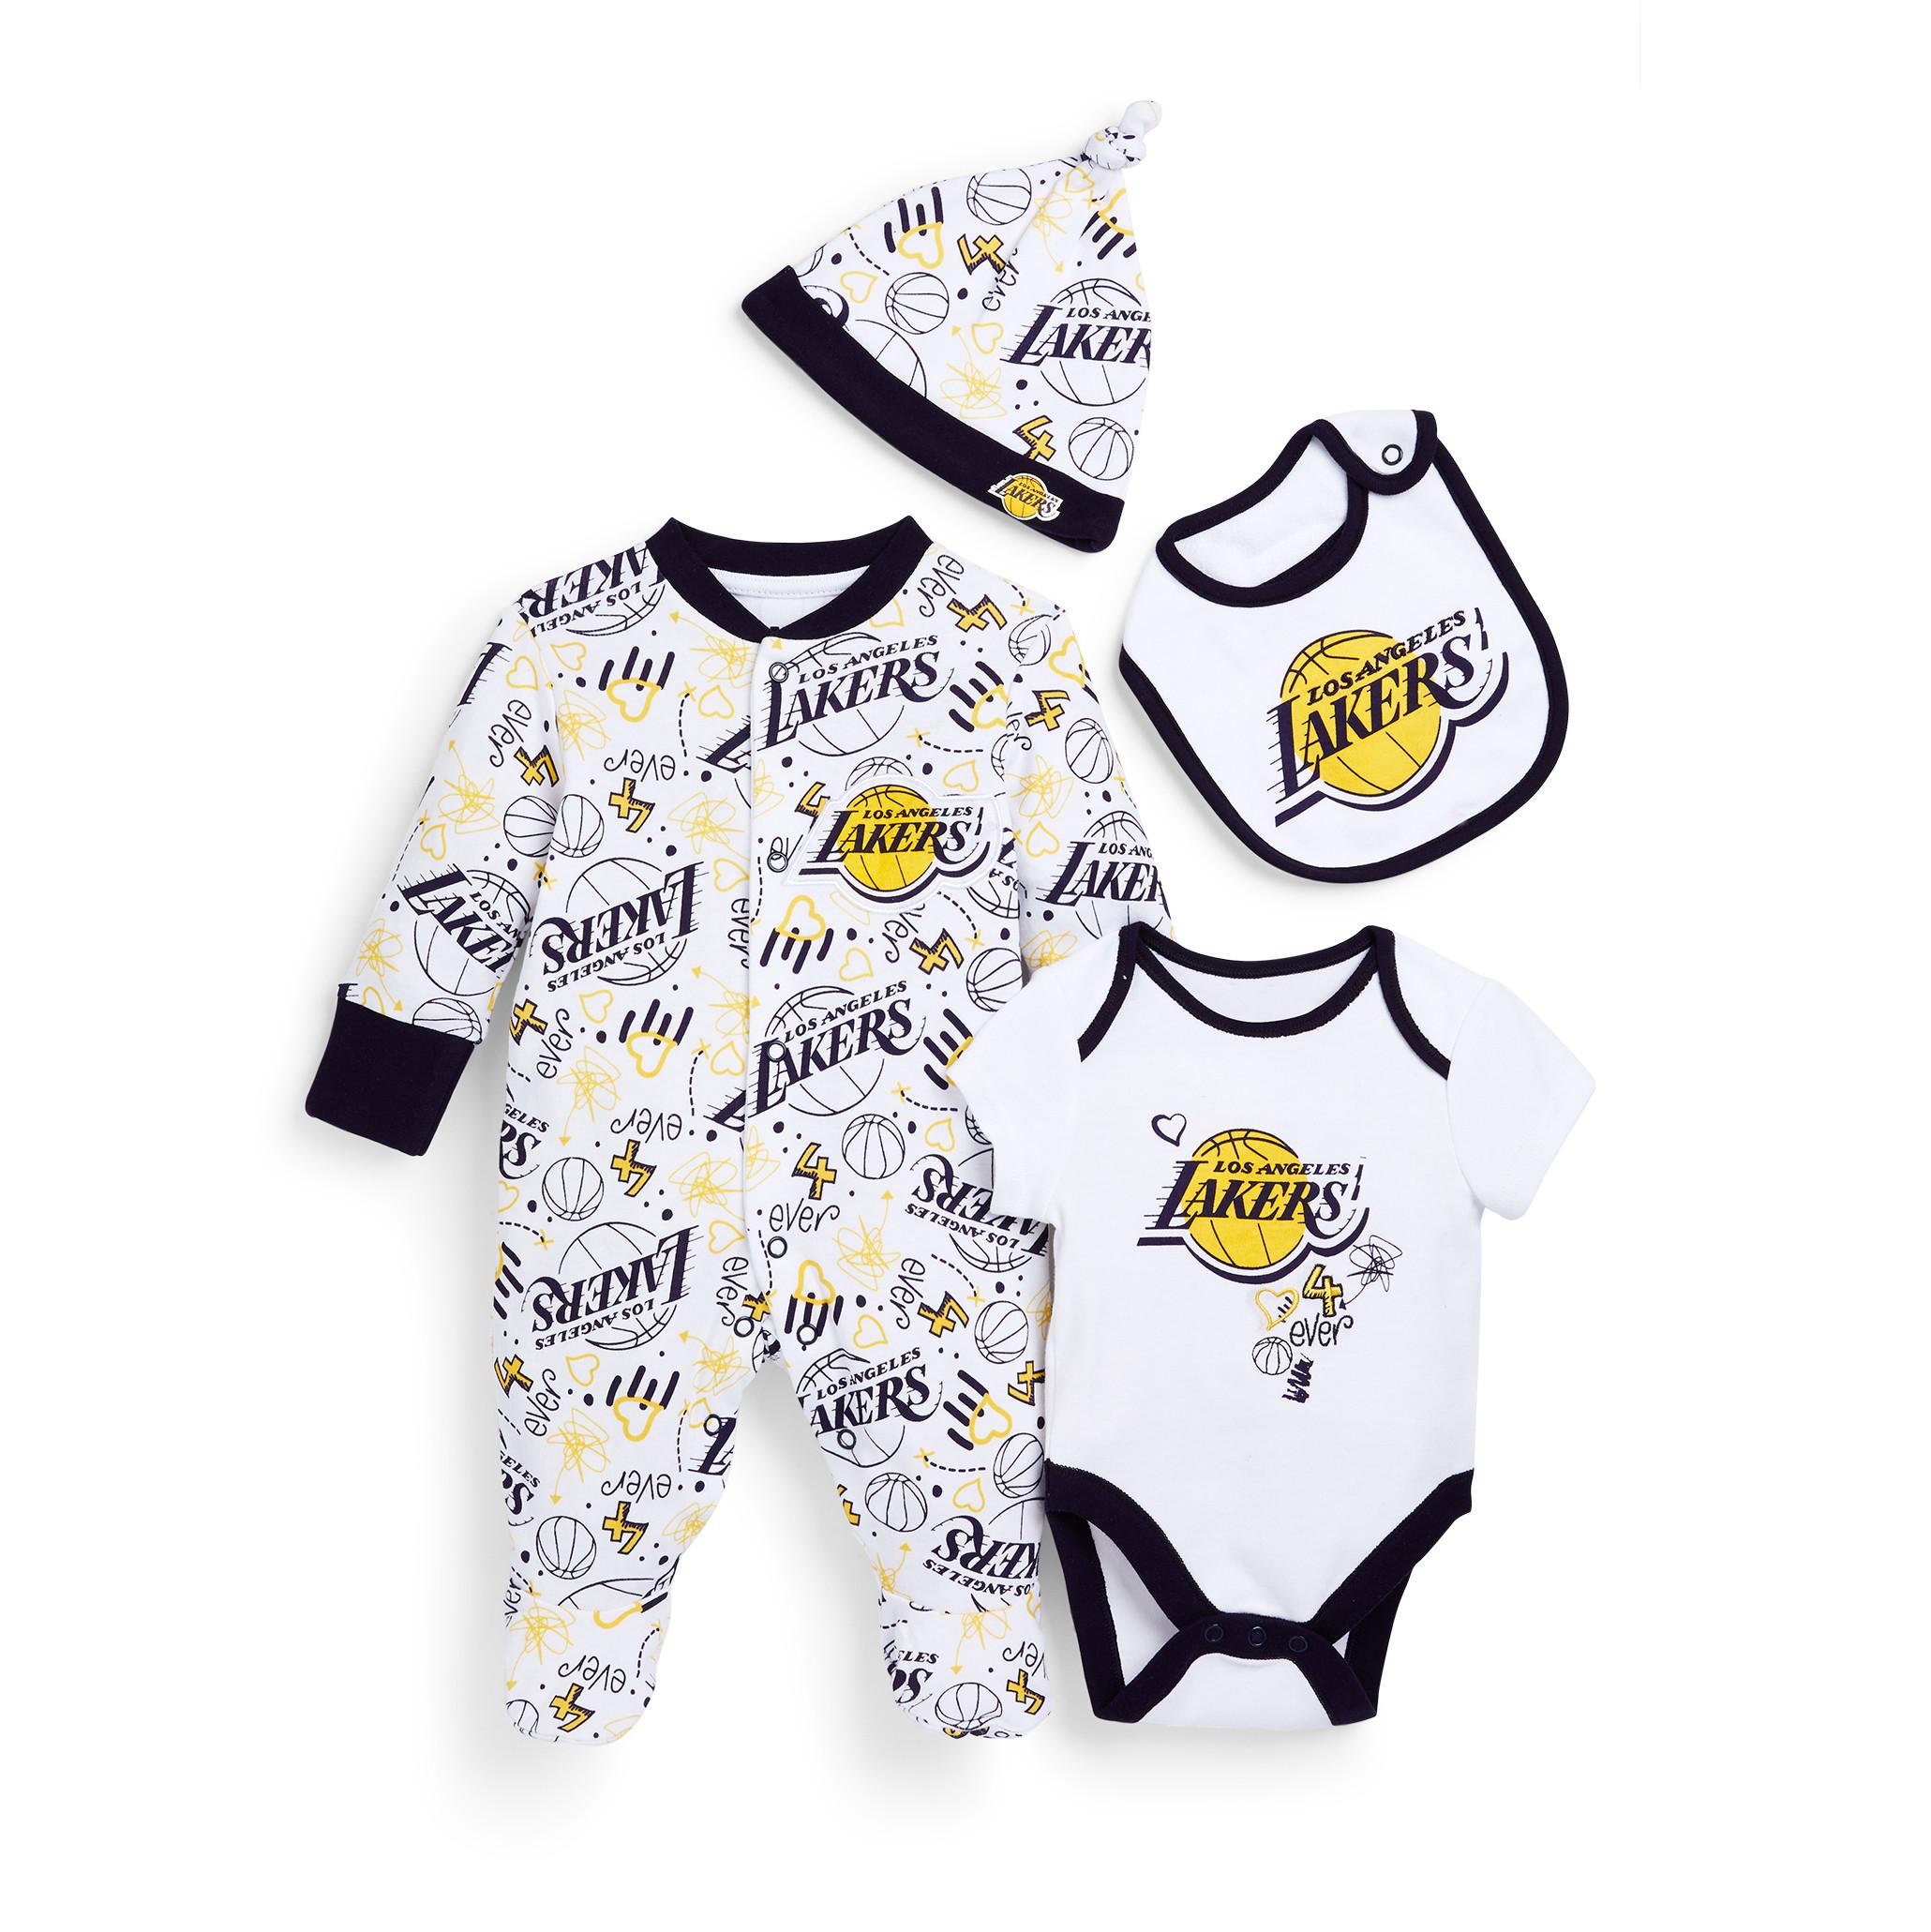 Newborn Baby Unisex Yellow And Purple NBA LA Lakers Sleepers, 2-Pack Baby  Clothing Essentials Baby Newborn Clothes Kids' Clothes All Primark Products  Primark